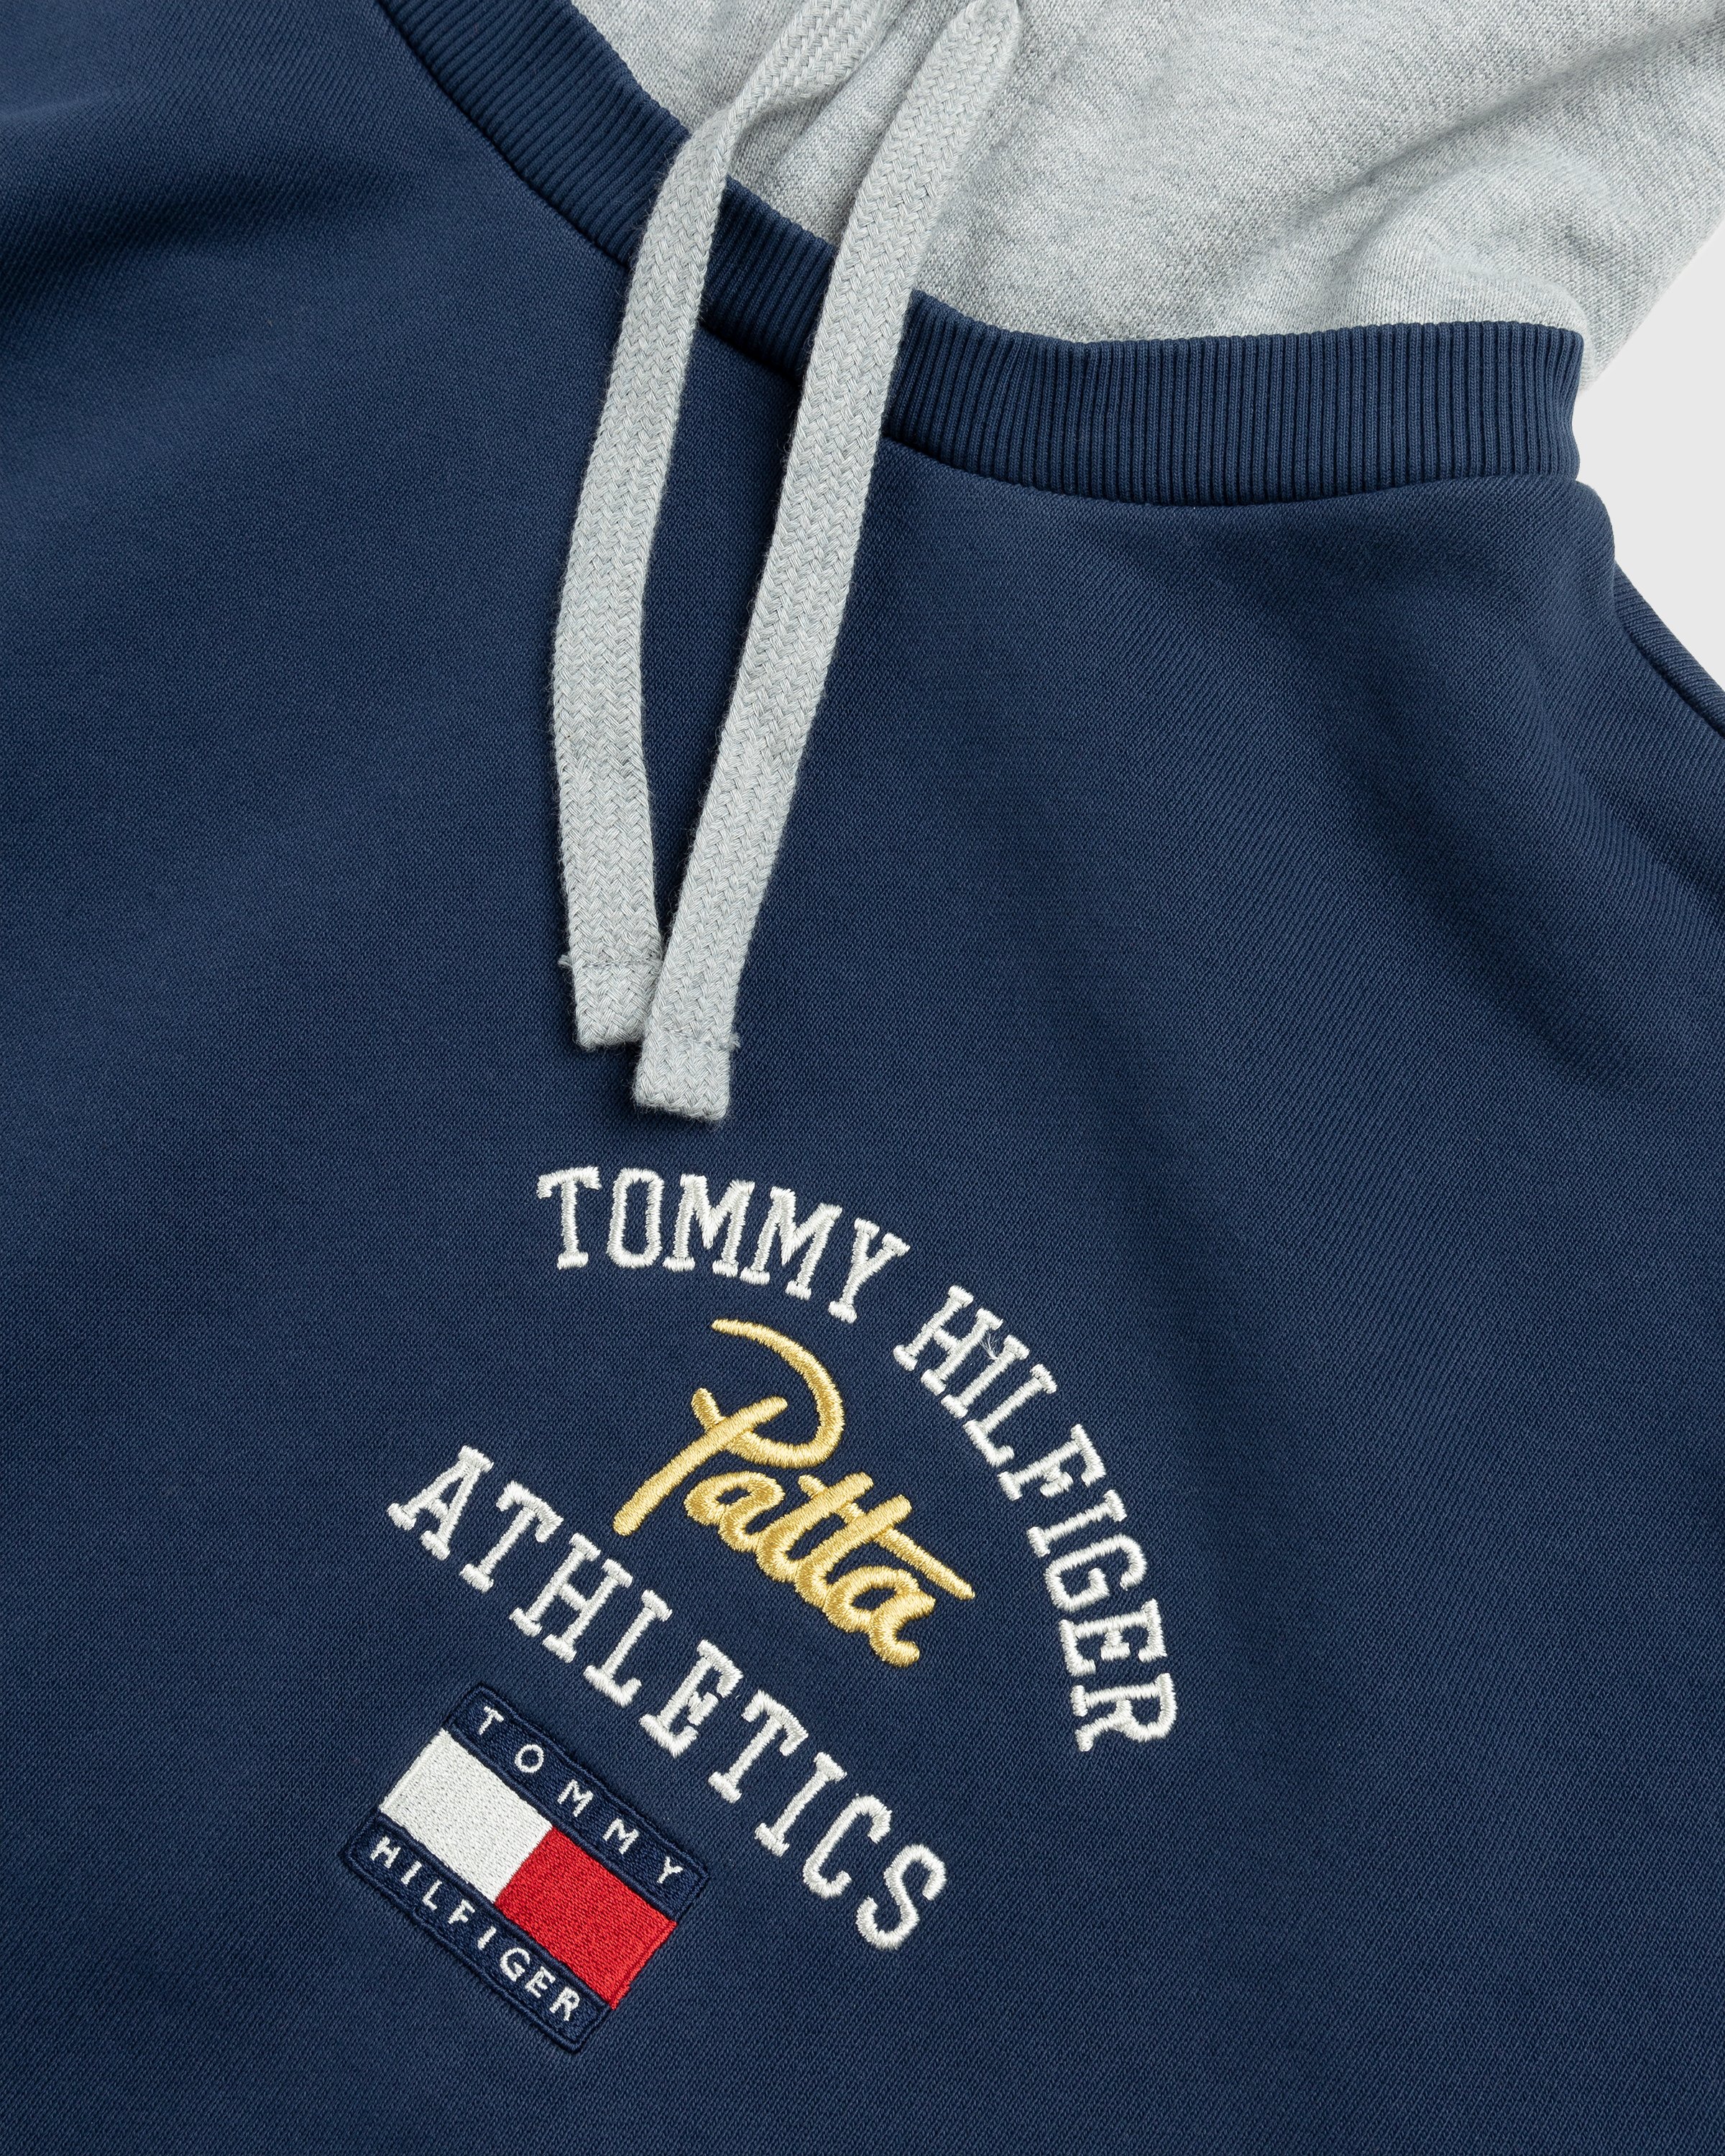 Patta x Tommy Hilfiger - Hoodie Sport Navy - Clothing - Blue - Image 4